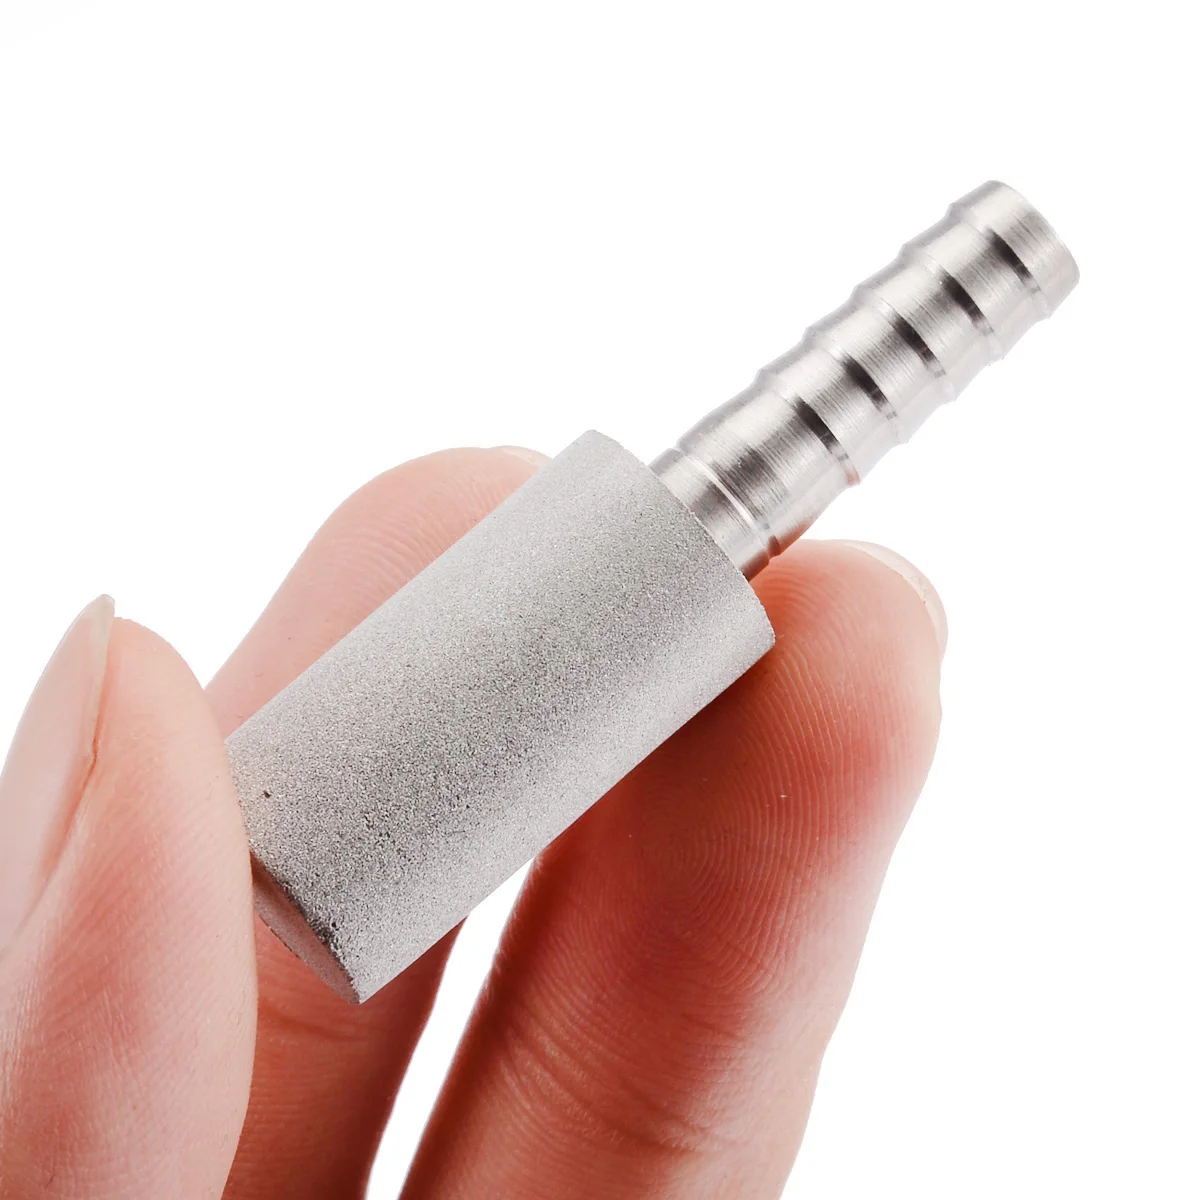 0.5 Micron Oxygenation Stone Homebrew Carbonation Aeration Stone Home DIY Beer Wine Brewing Fermentation Diffusion Stone Tool